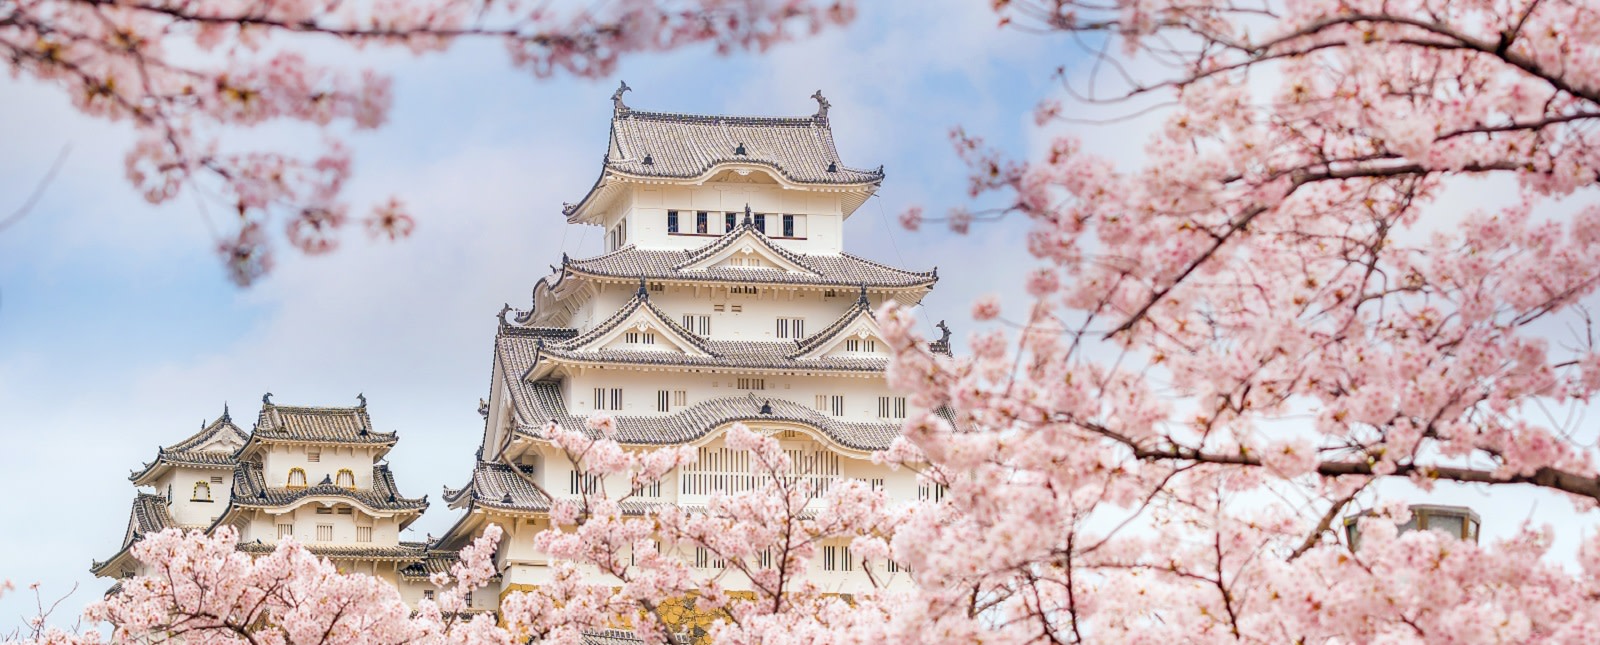 Cherry Blossom Festival in Japan When and Where Go